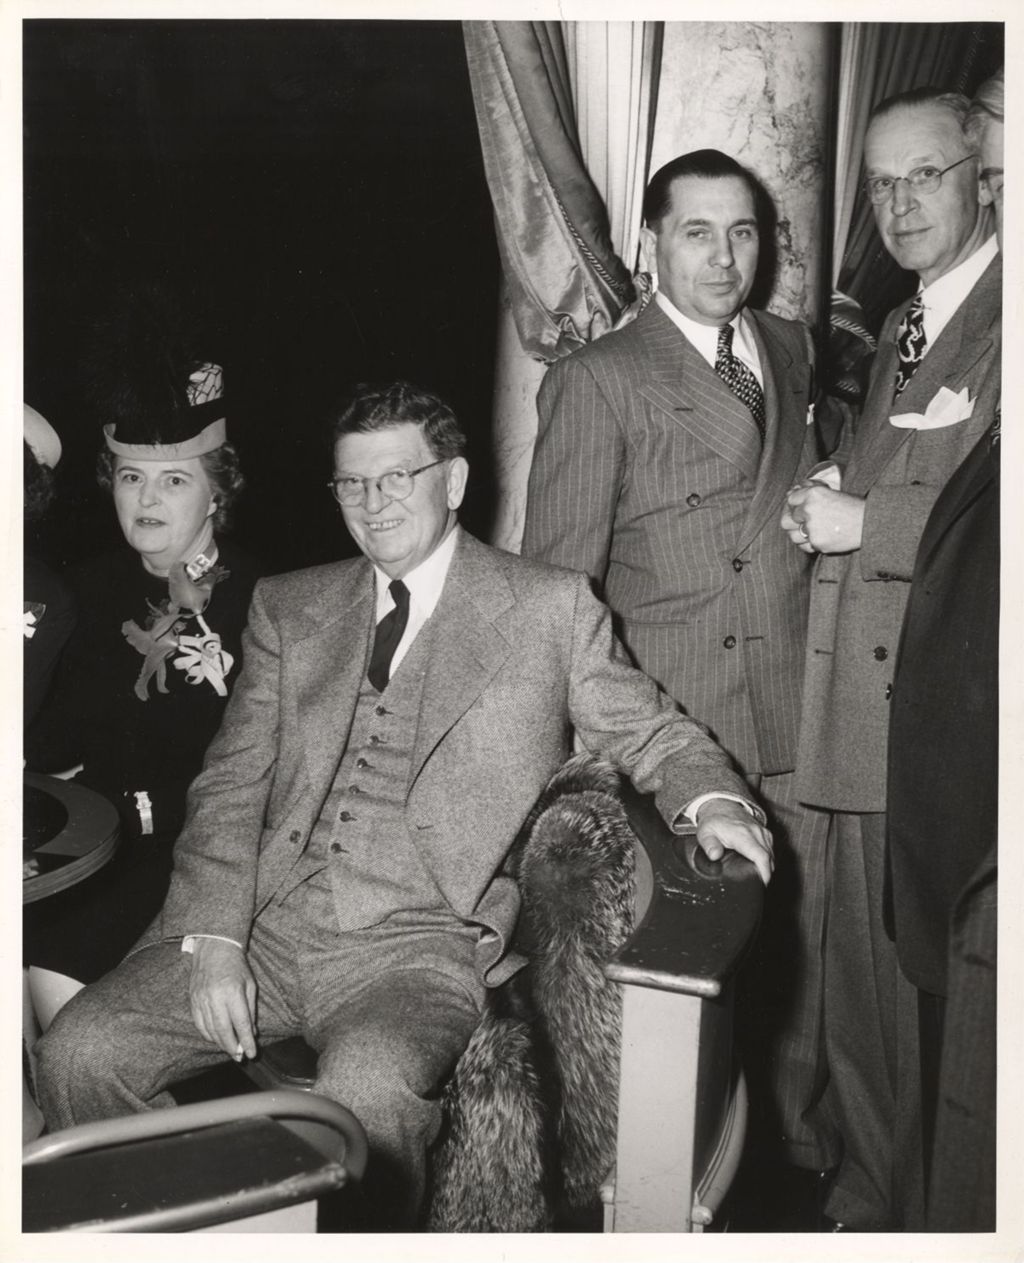 Mayor Edward J. Kelly and others at an event